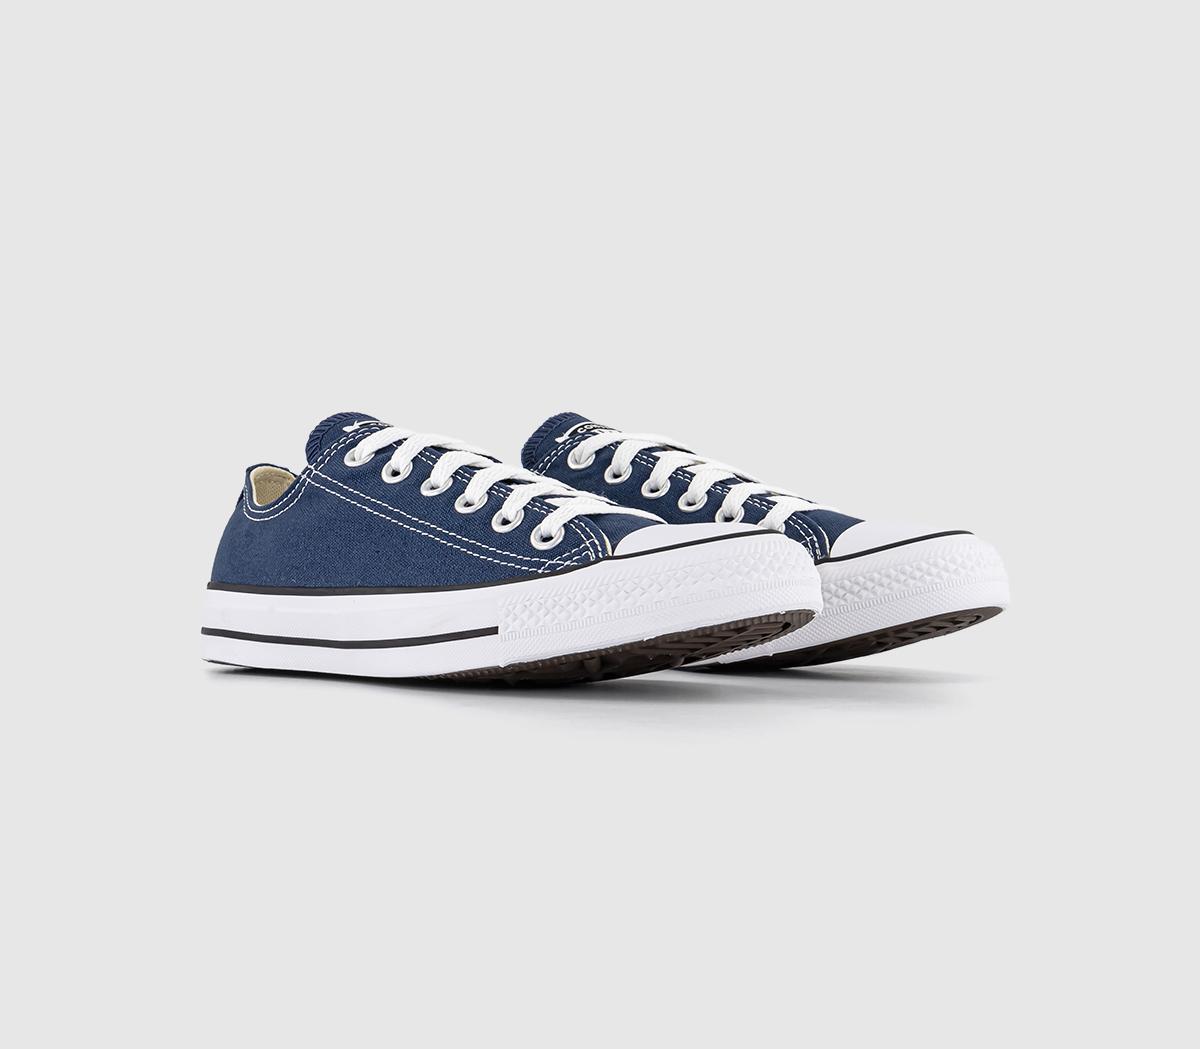 Mens Converse All Star Low Canvas Trainers In Blue / White, 6.5